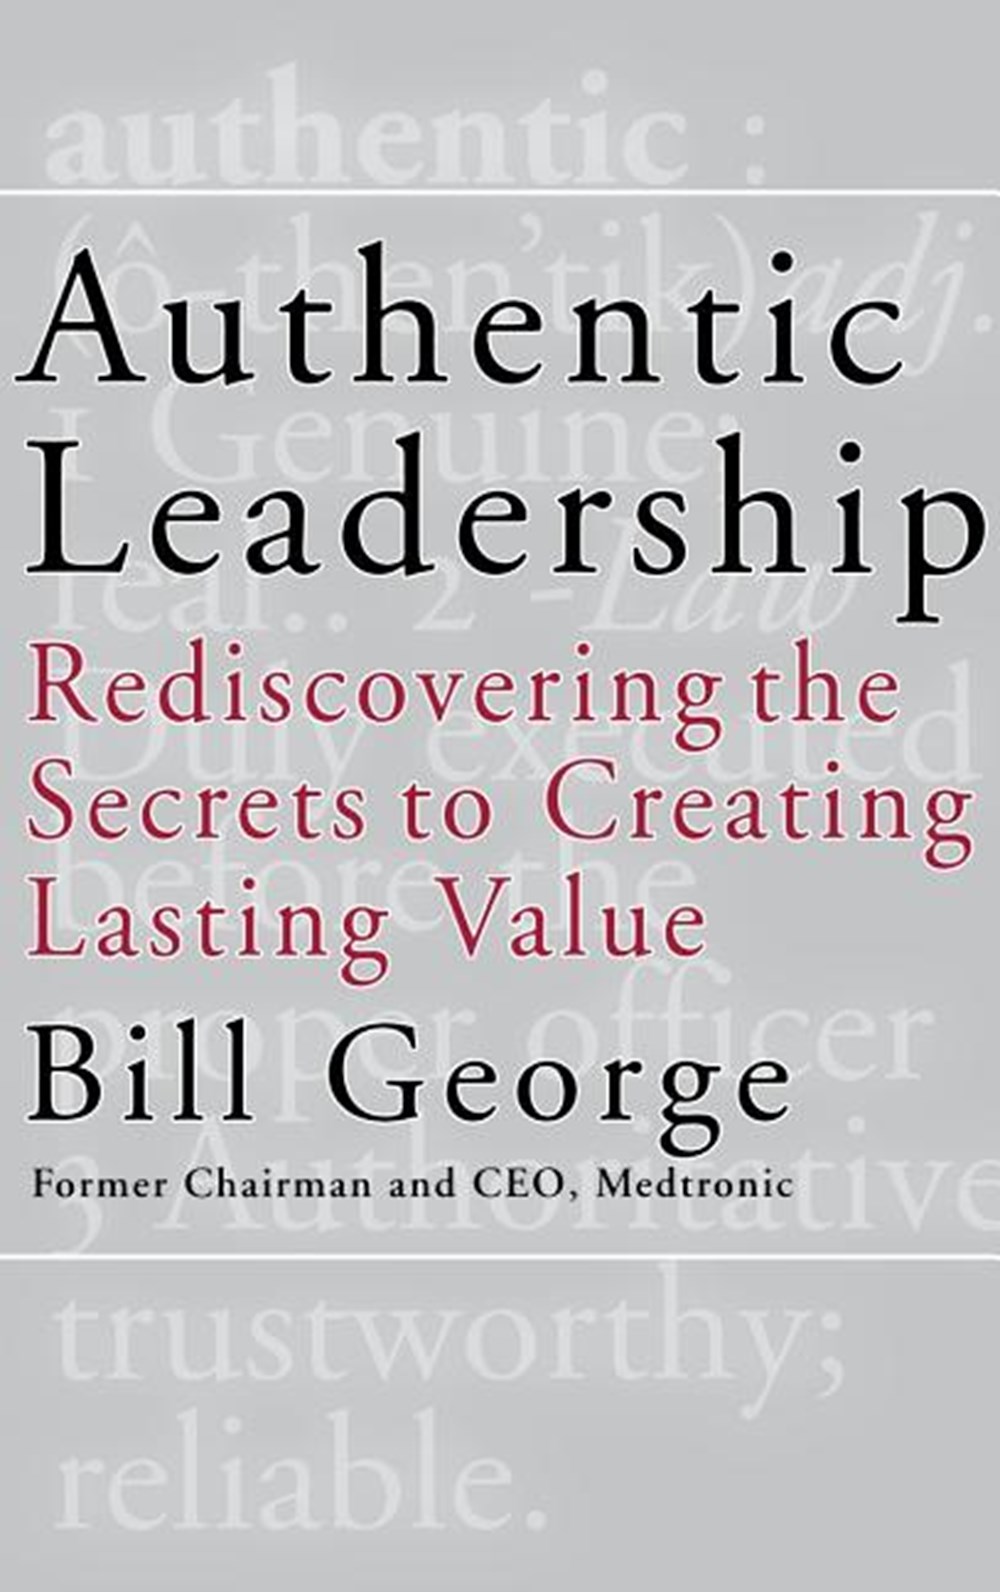 Authentic Leadership Rediscovering the Secrets to Creating Lasting Value